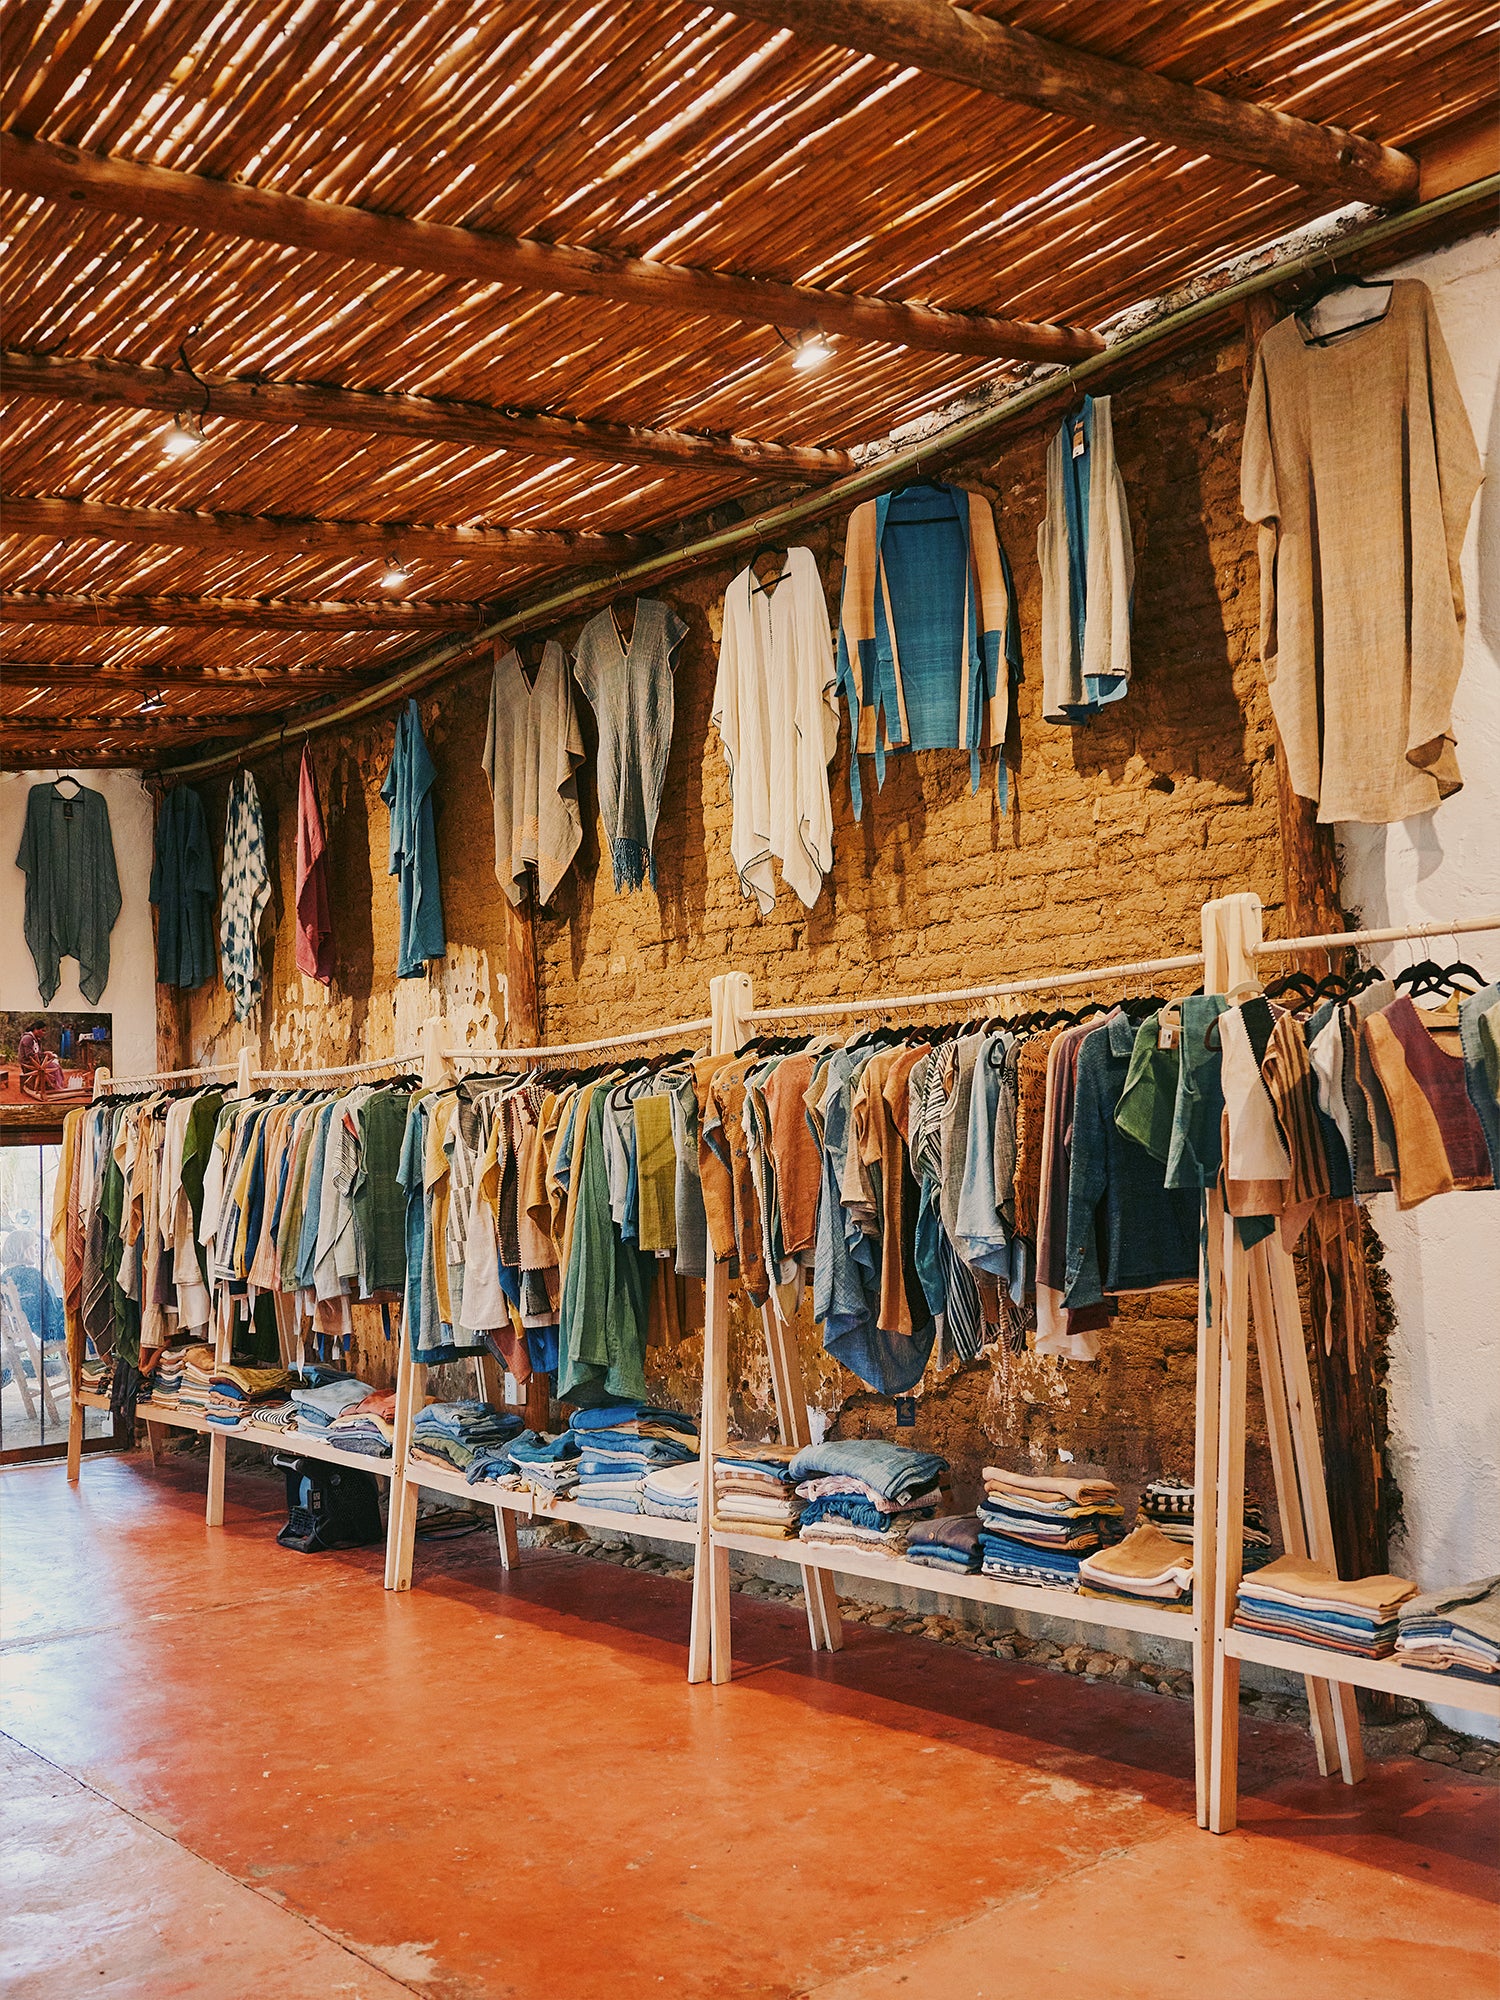 Long row of clothing rack with thatched ceiling in Oaxaca, Mexico.